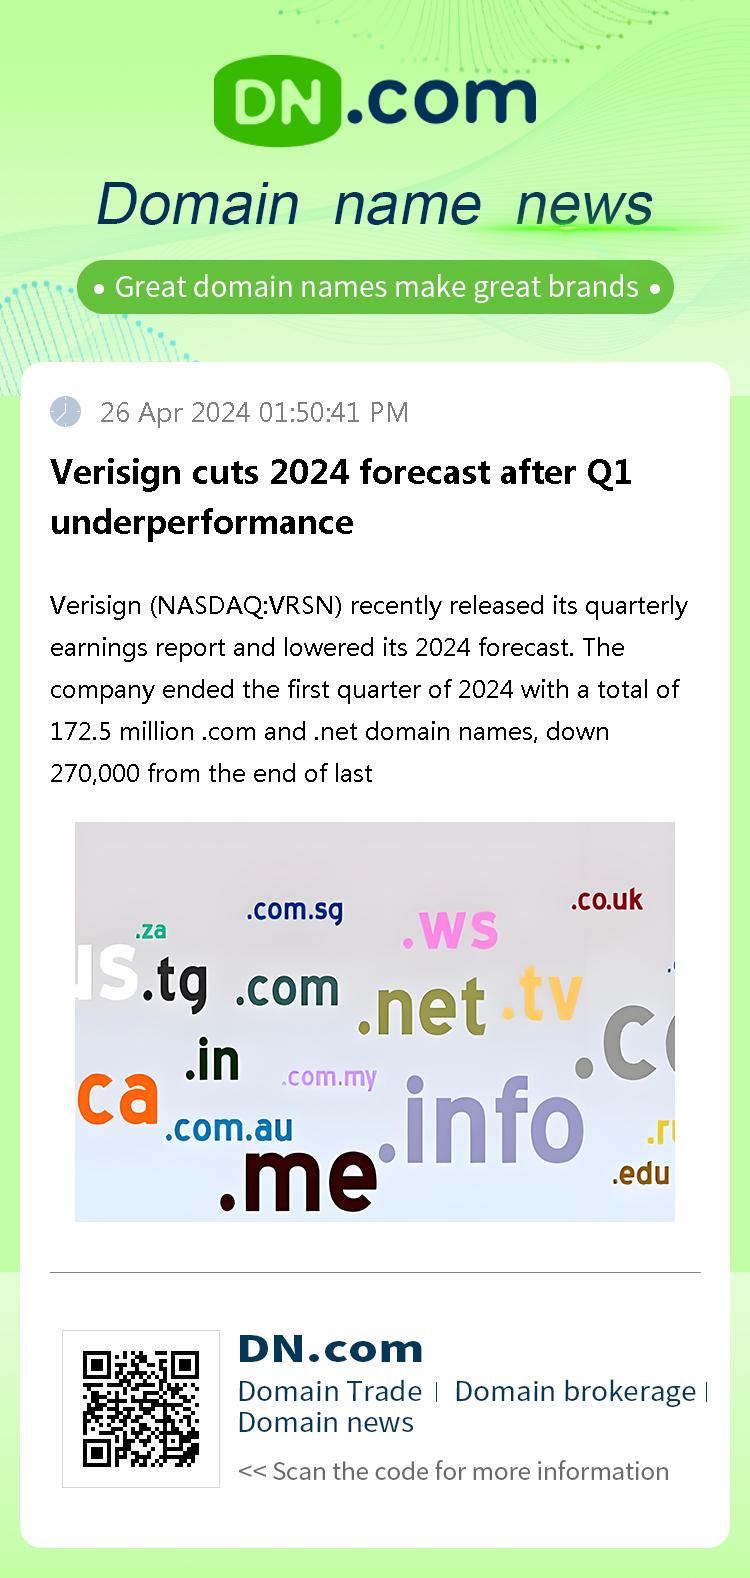 Verisign cuts 2024 forecast after Q1 underperformance